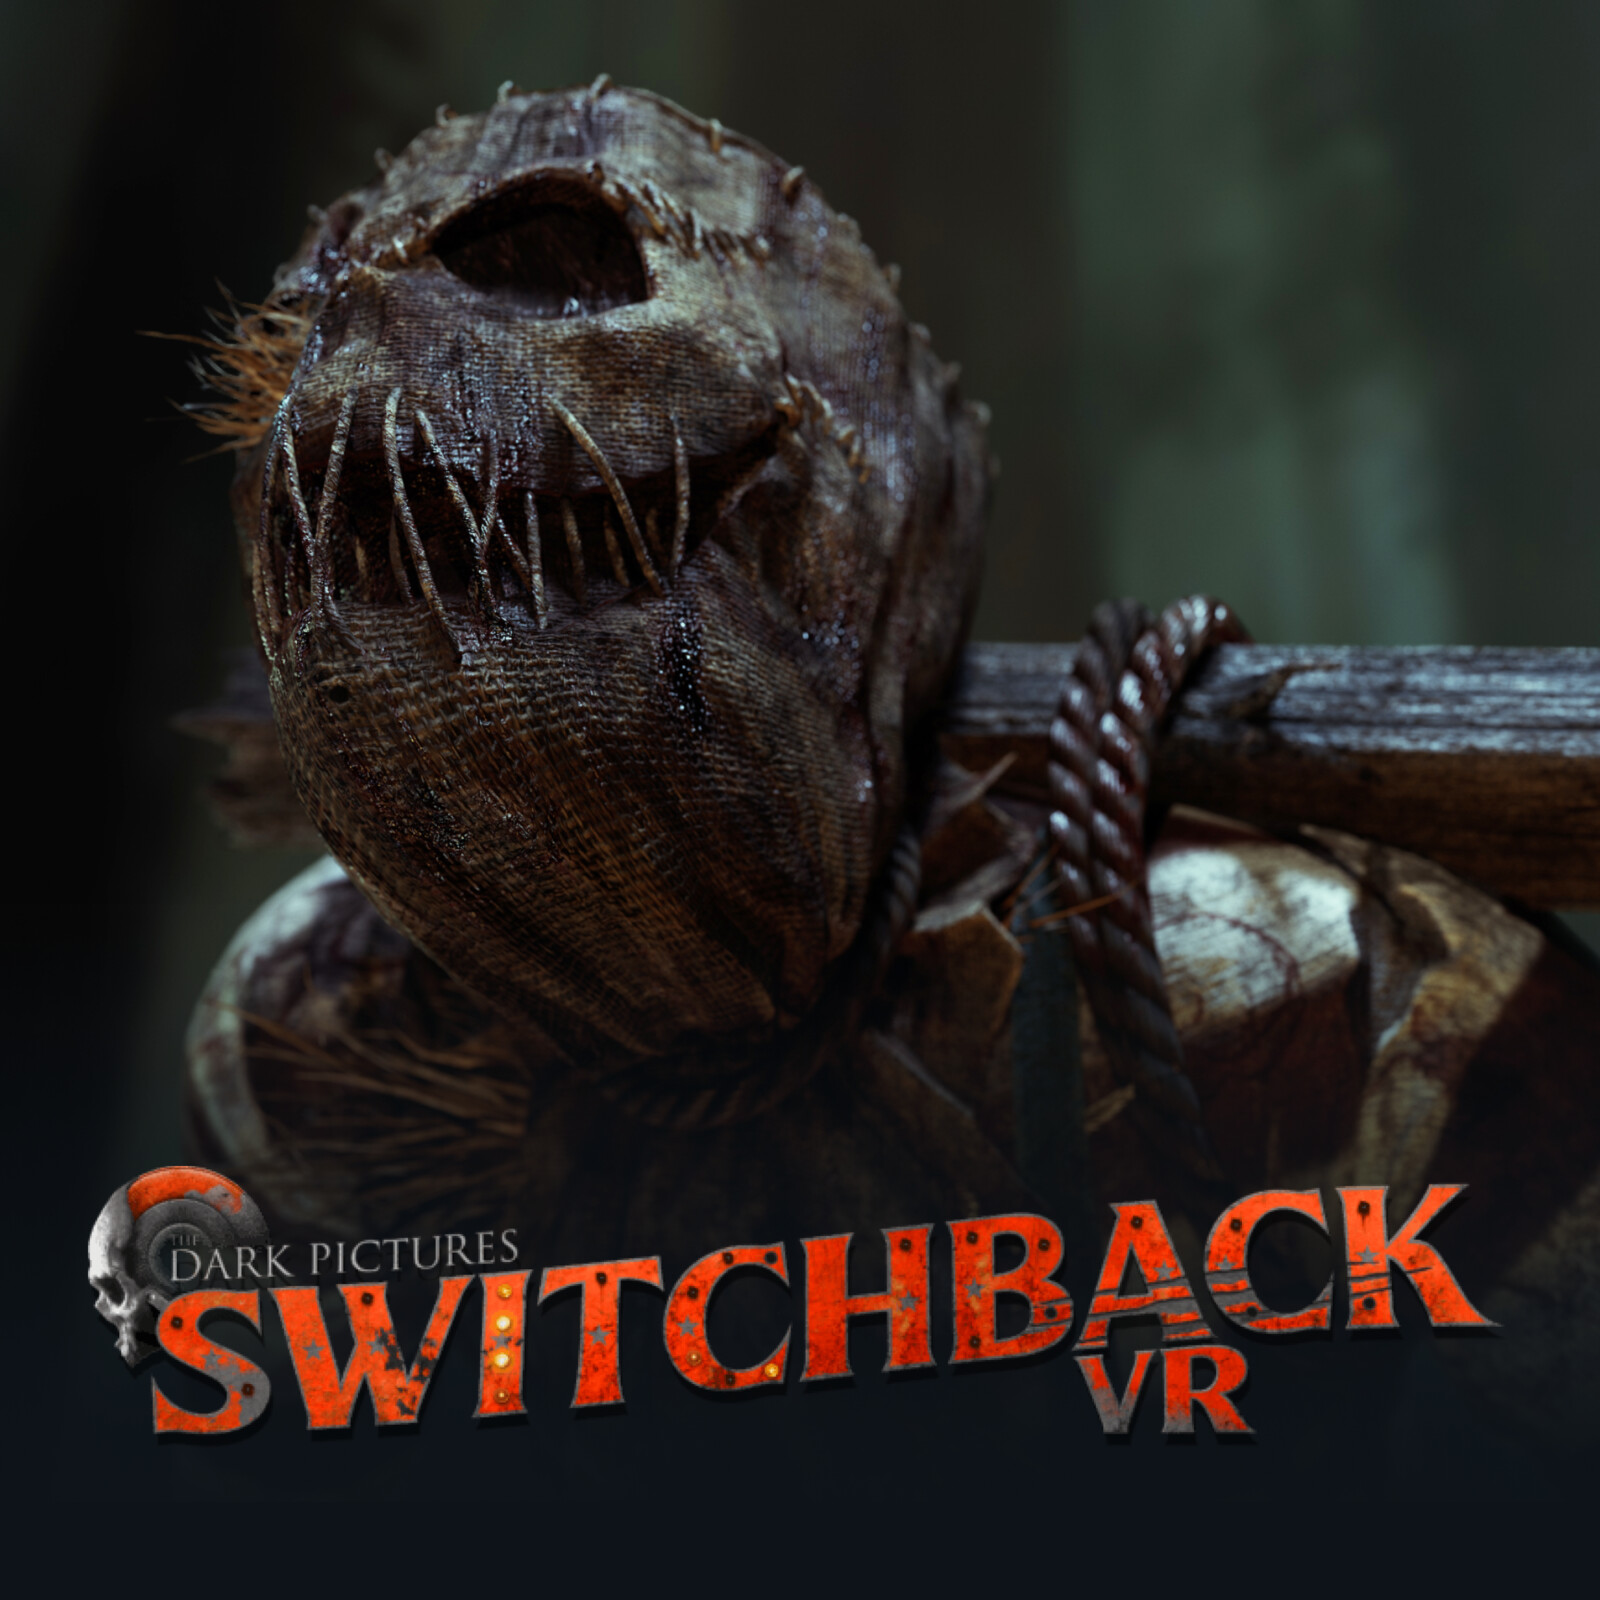 Switchback VR - Scarecrow 01